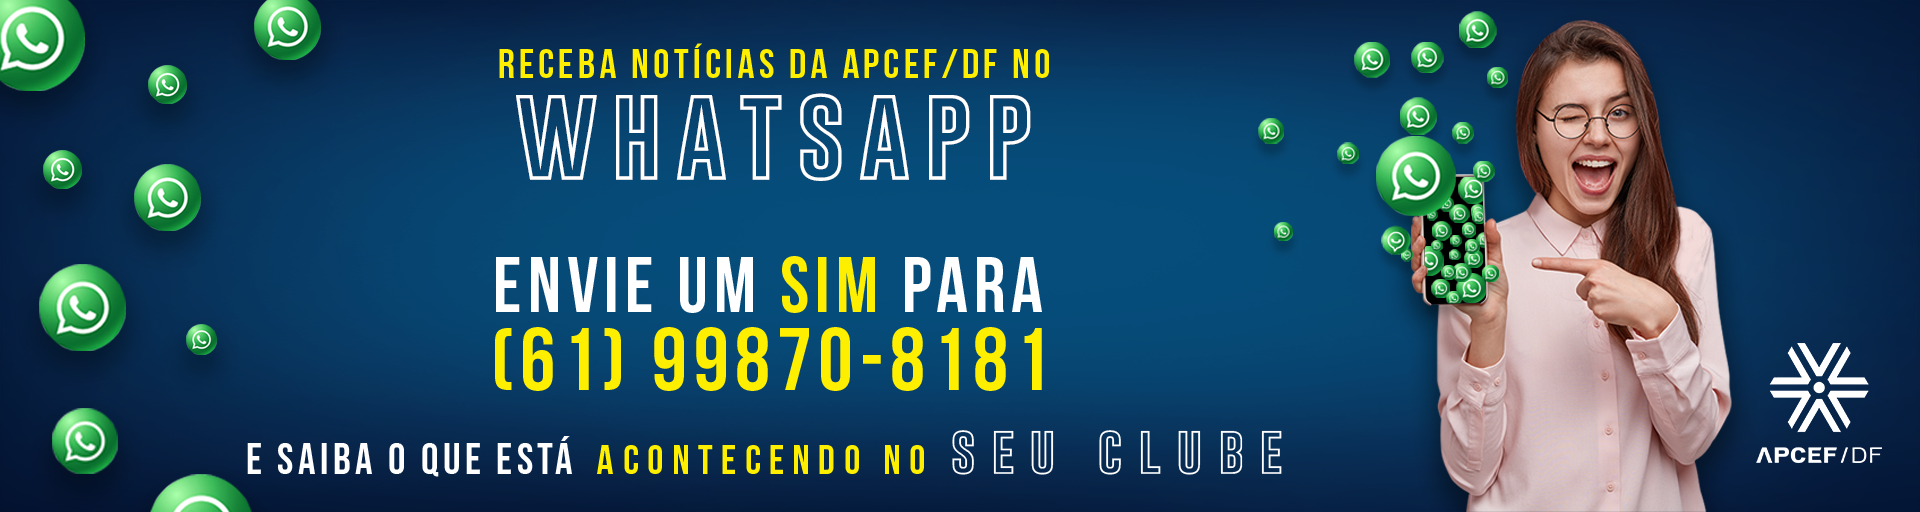 whats app 1920x520.png